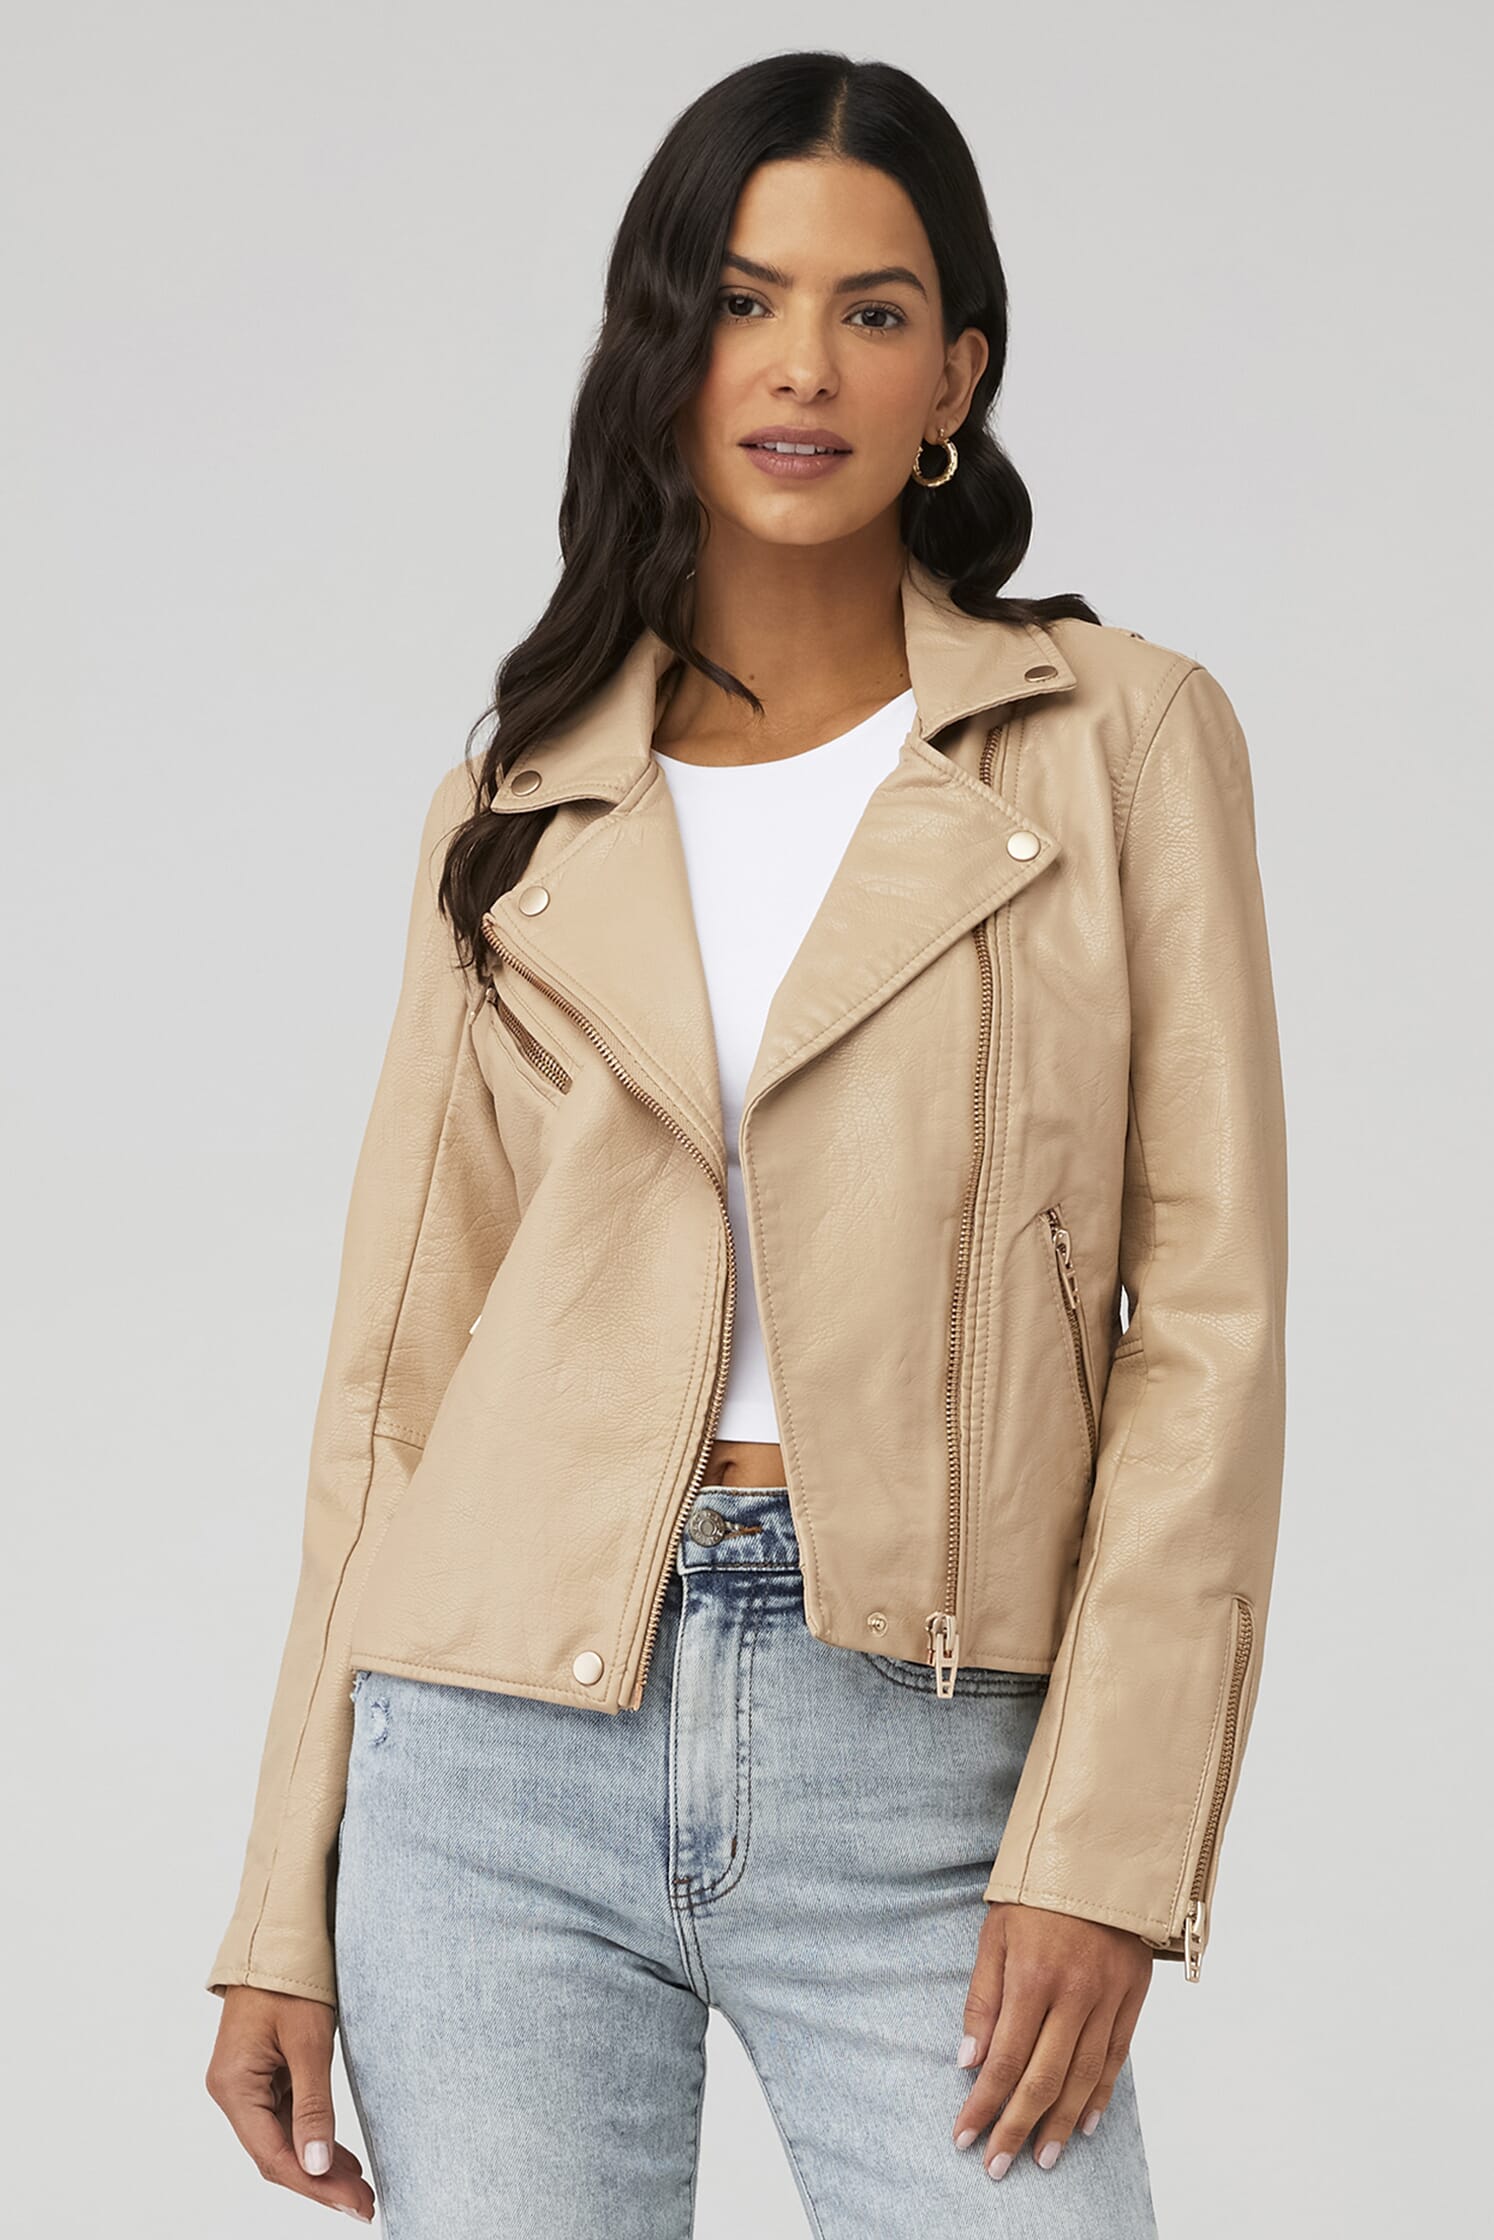 Blank NYC | Faux Lear Moto Jacket in Natural Light| FashionPass